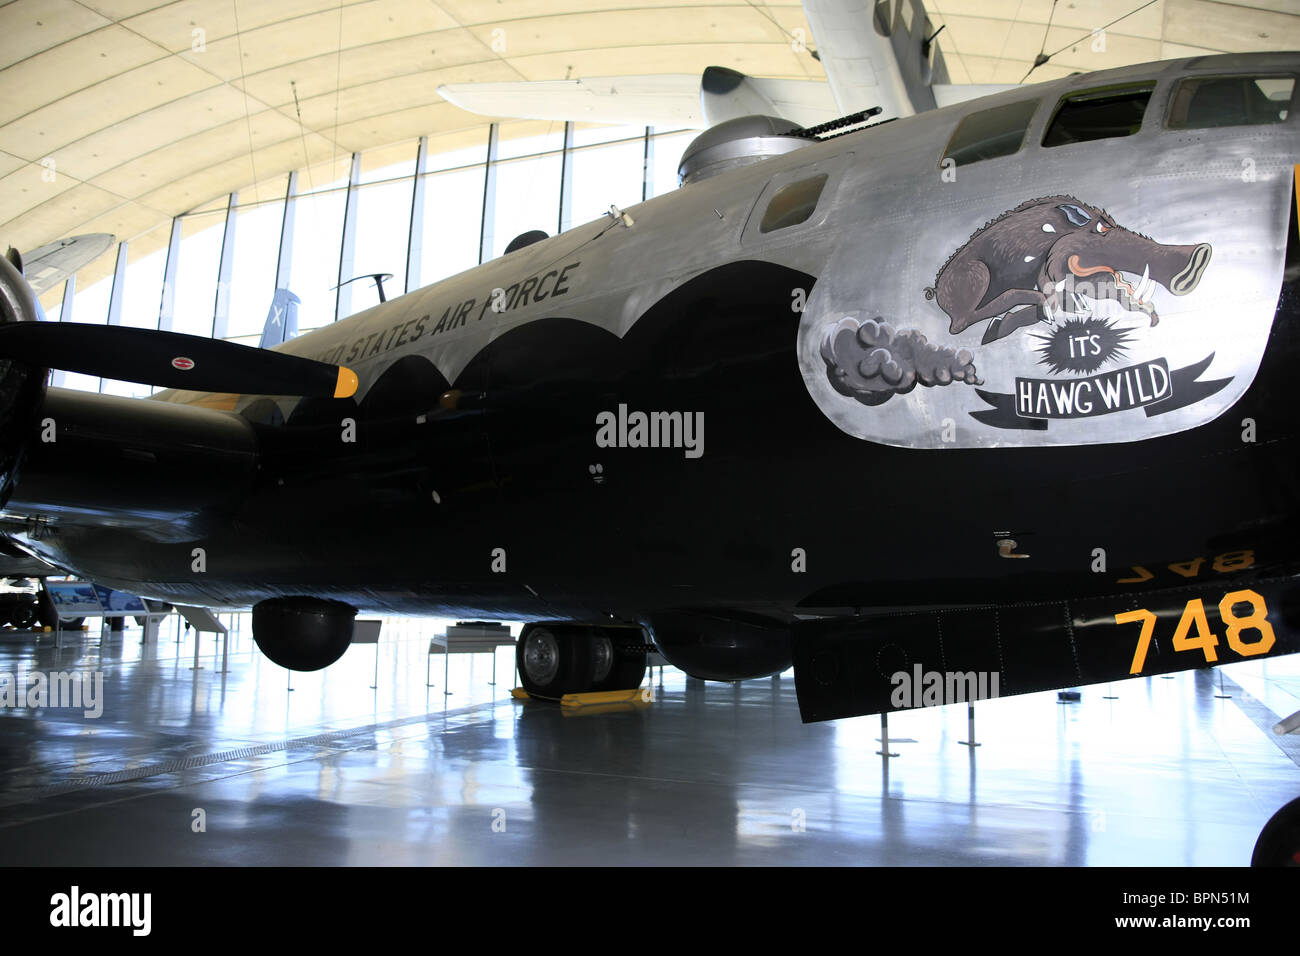 A B29 Super Fortress ww2 Bomber plane on display at the American Air Museum IWM Duxford Stock Photo